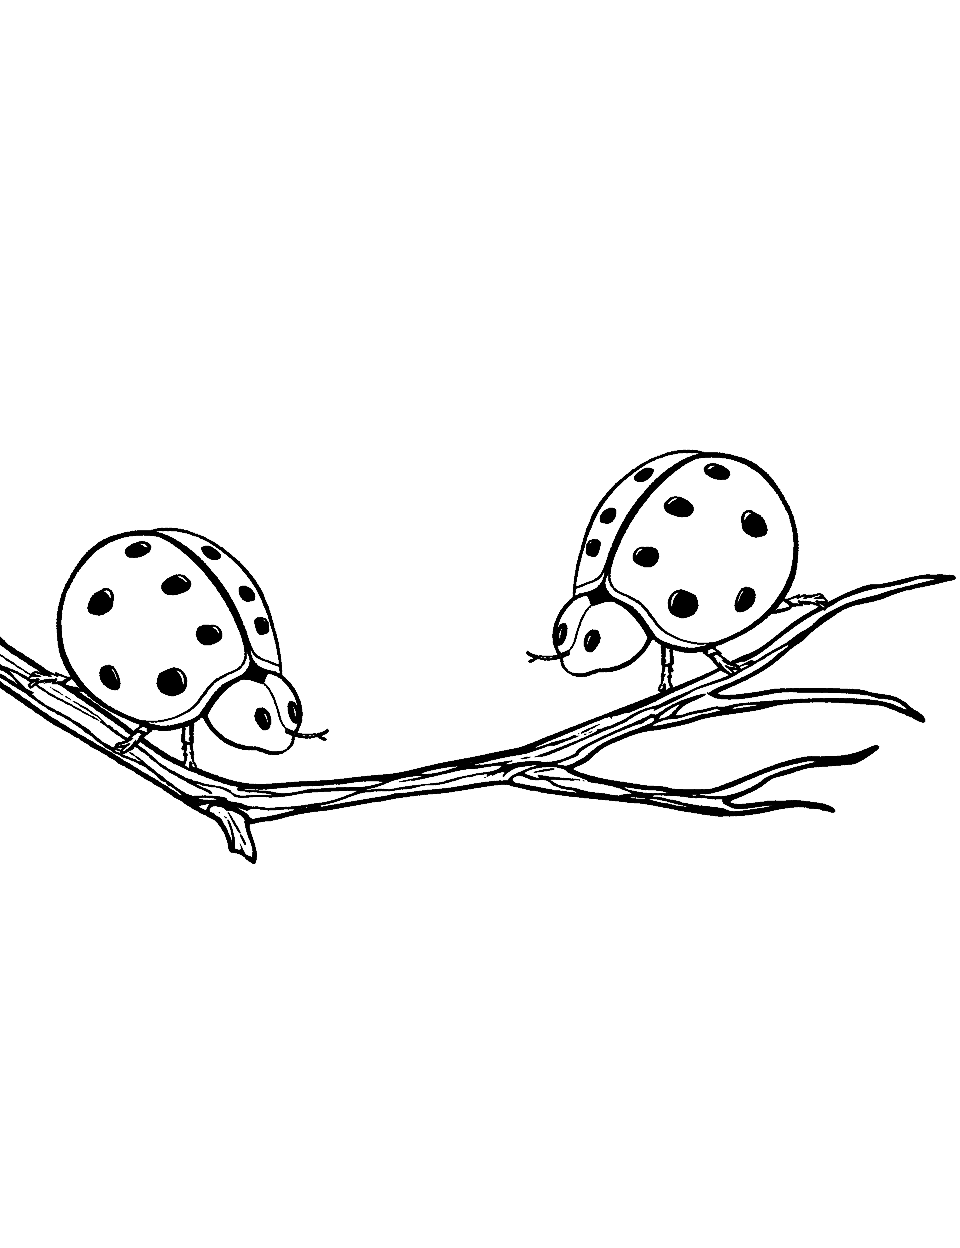 Ladybird Beetle Friends Meeting Coloring Page - A scene where two Ladybird beetles meet each other on a branch.